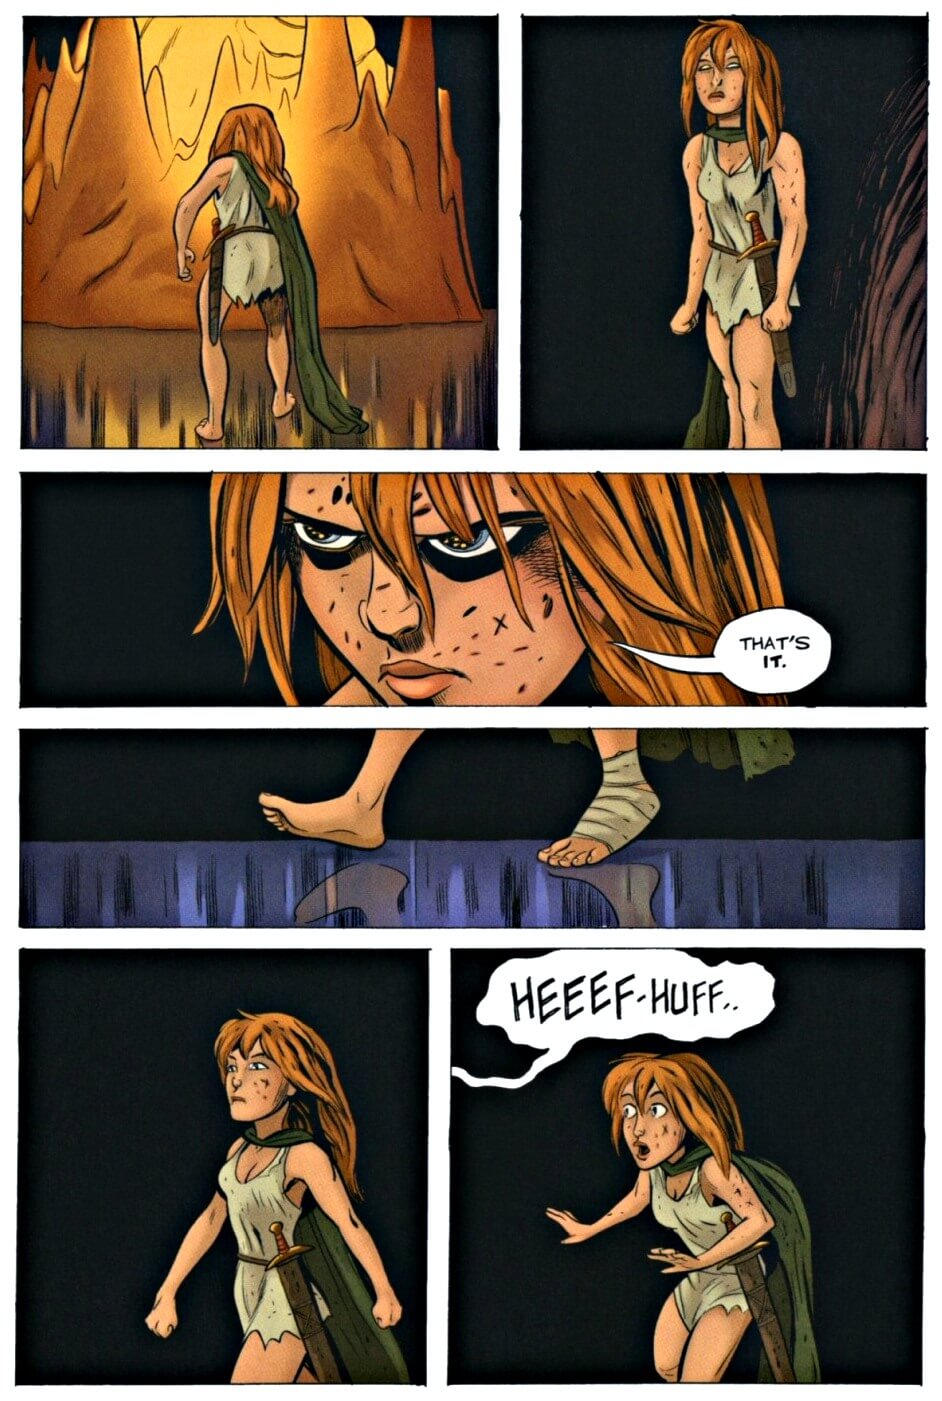 page 133 chapter 5 of bone 9 crown of horns graphic novel